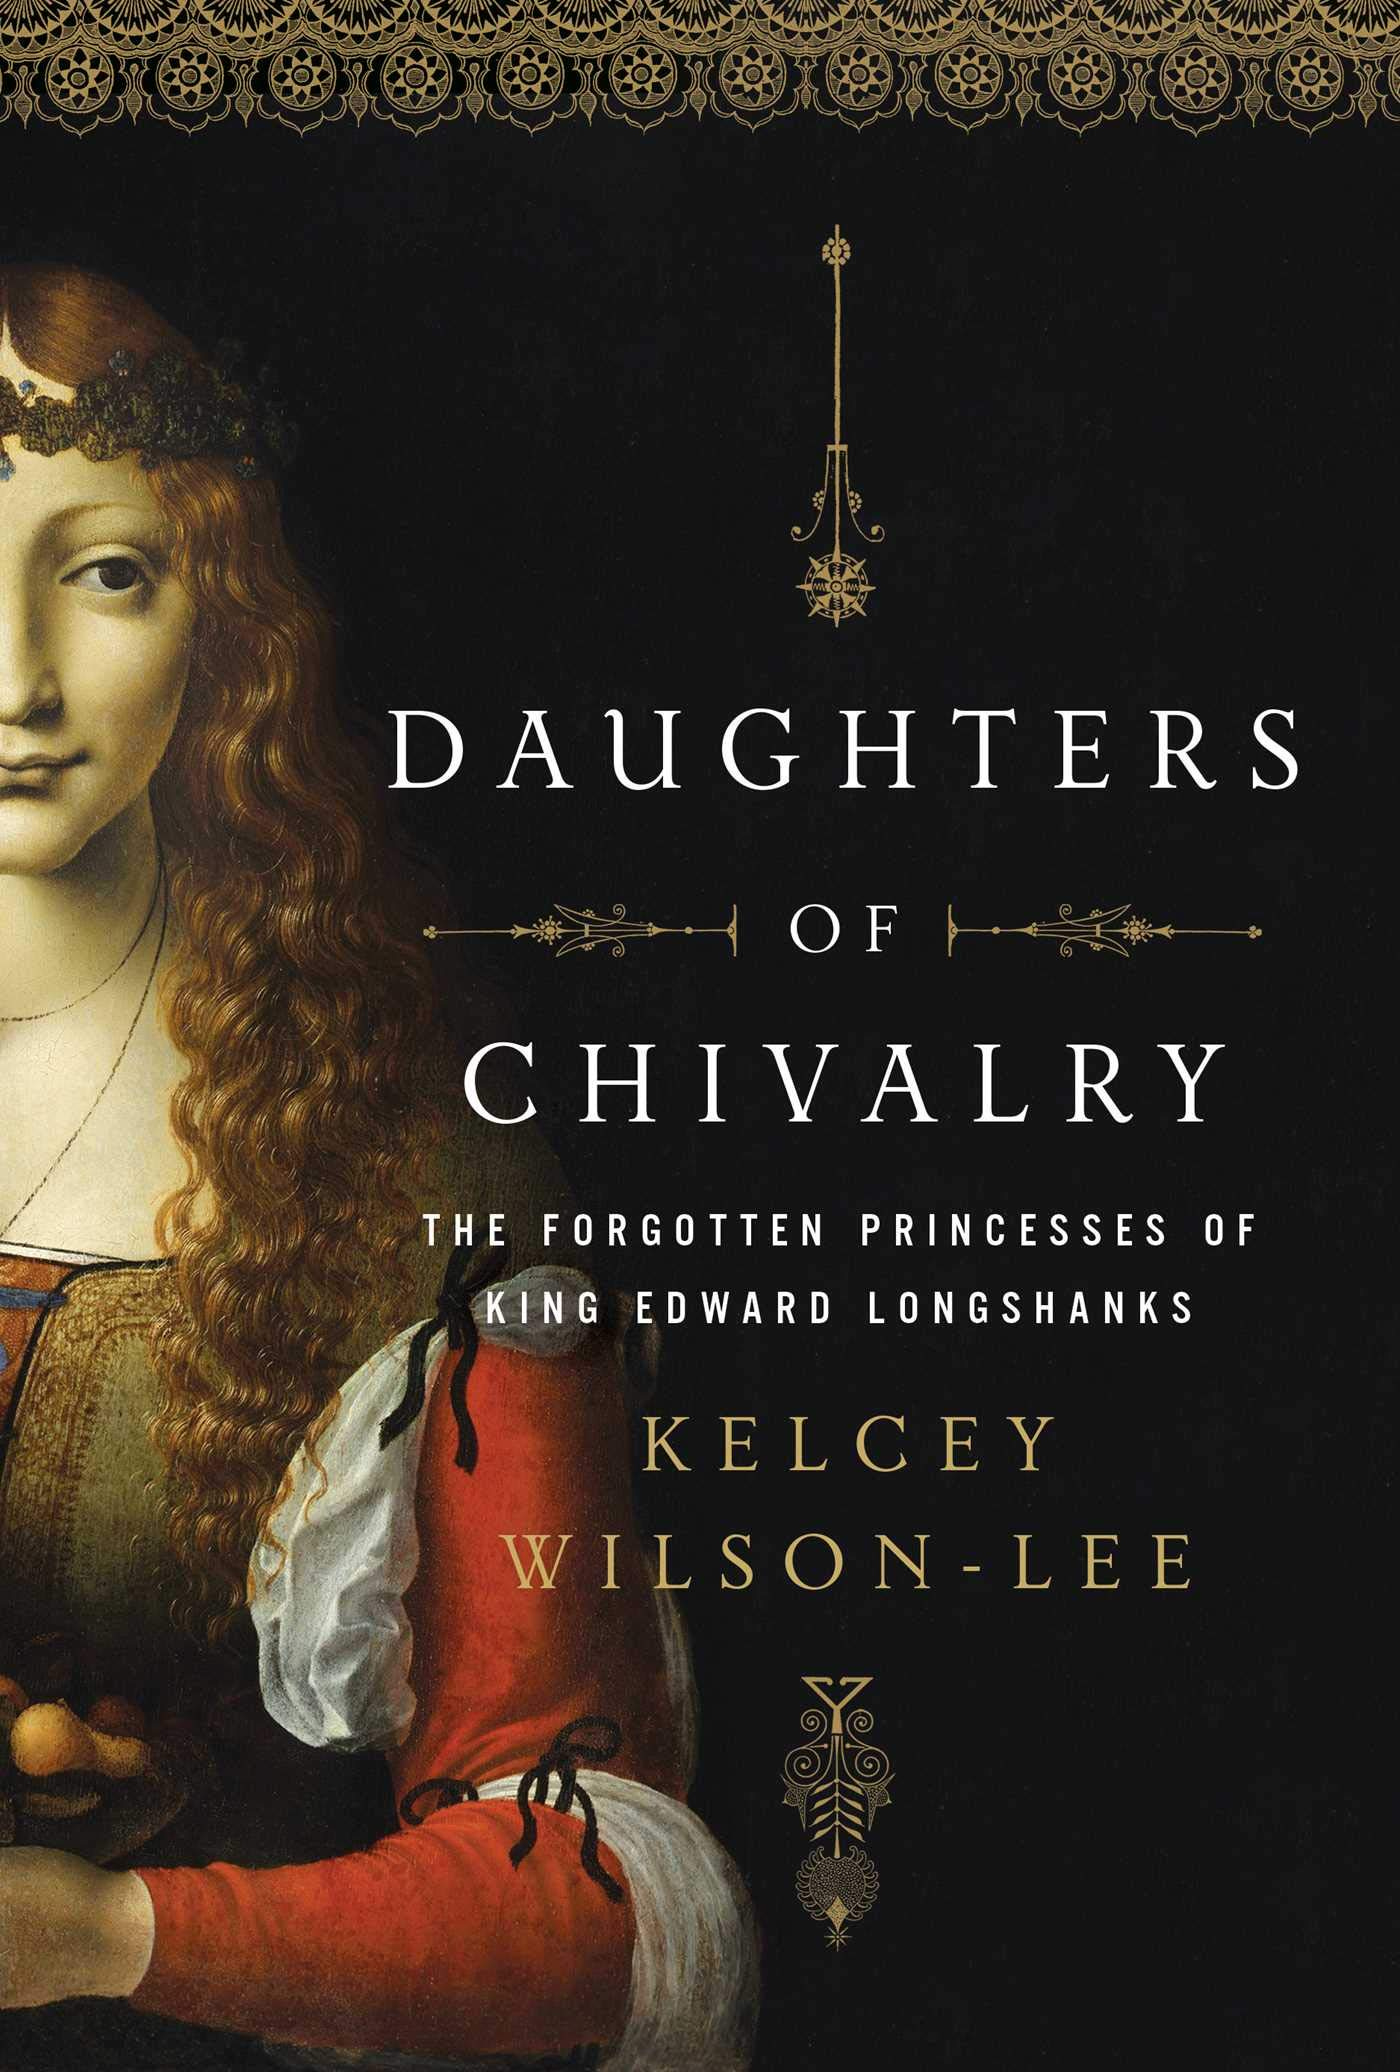 Daughters of Chivalry: The Forgotten Children of King Edward Longshanks:  Wilson-Lee, Kelcey: 9781643131948: Amazon.com: Books